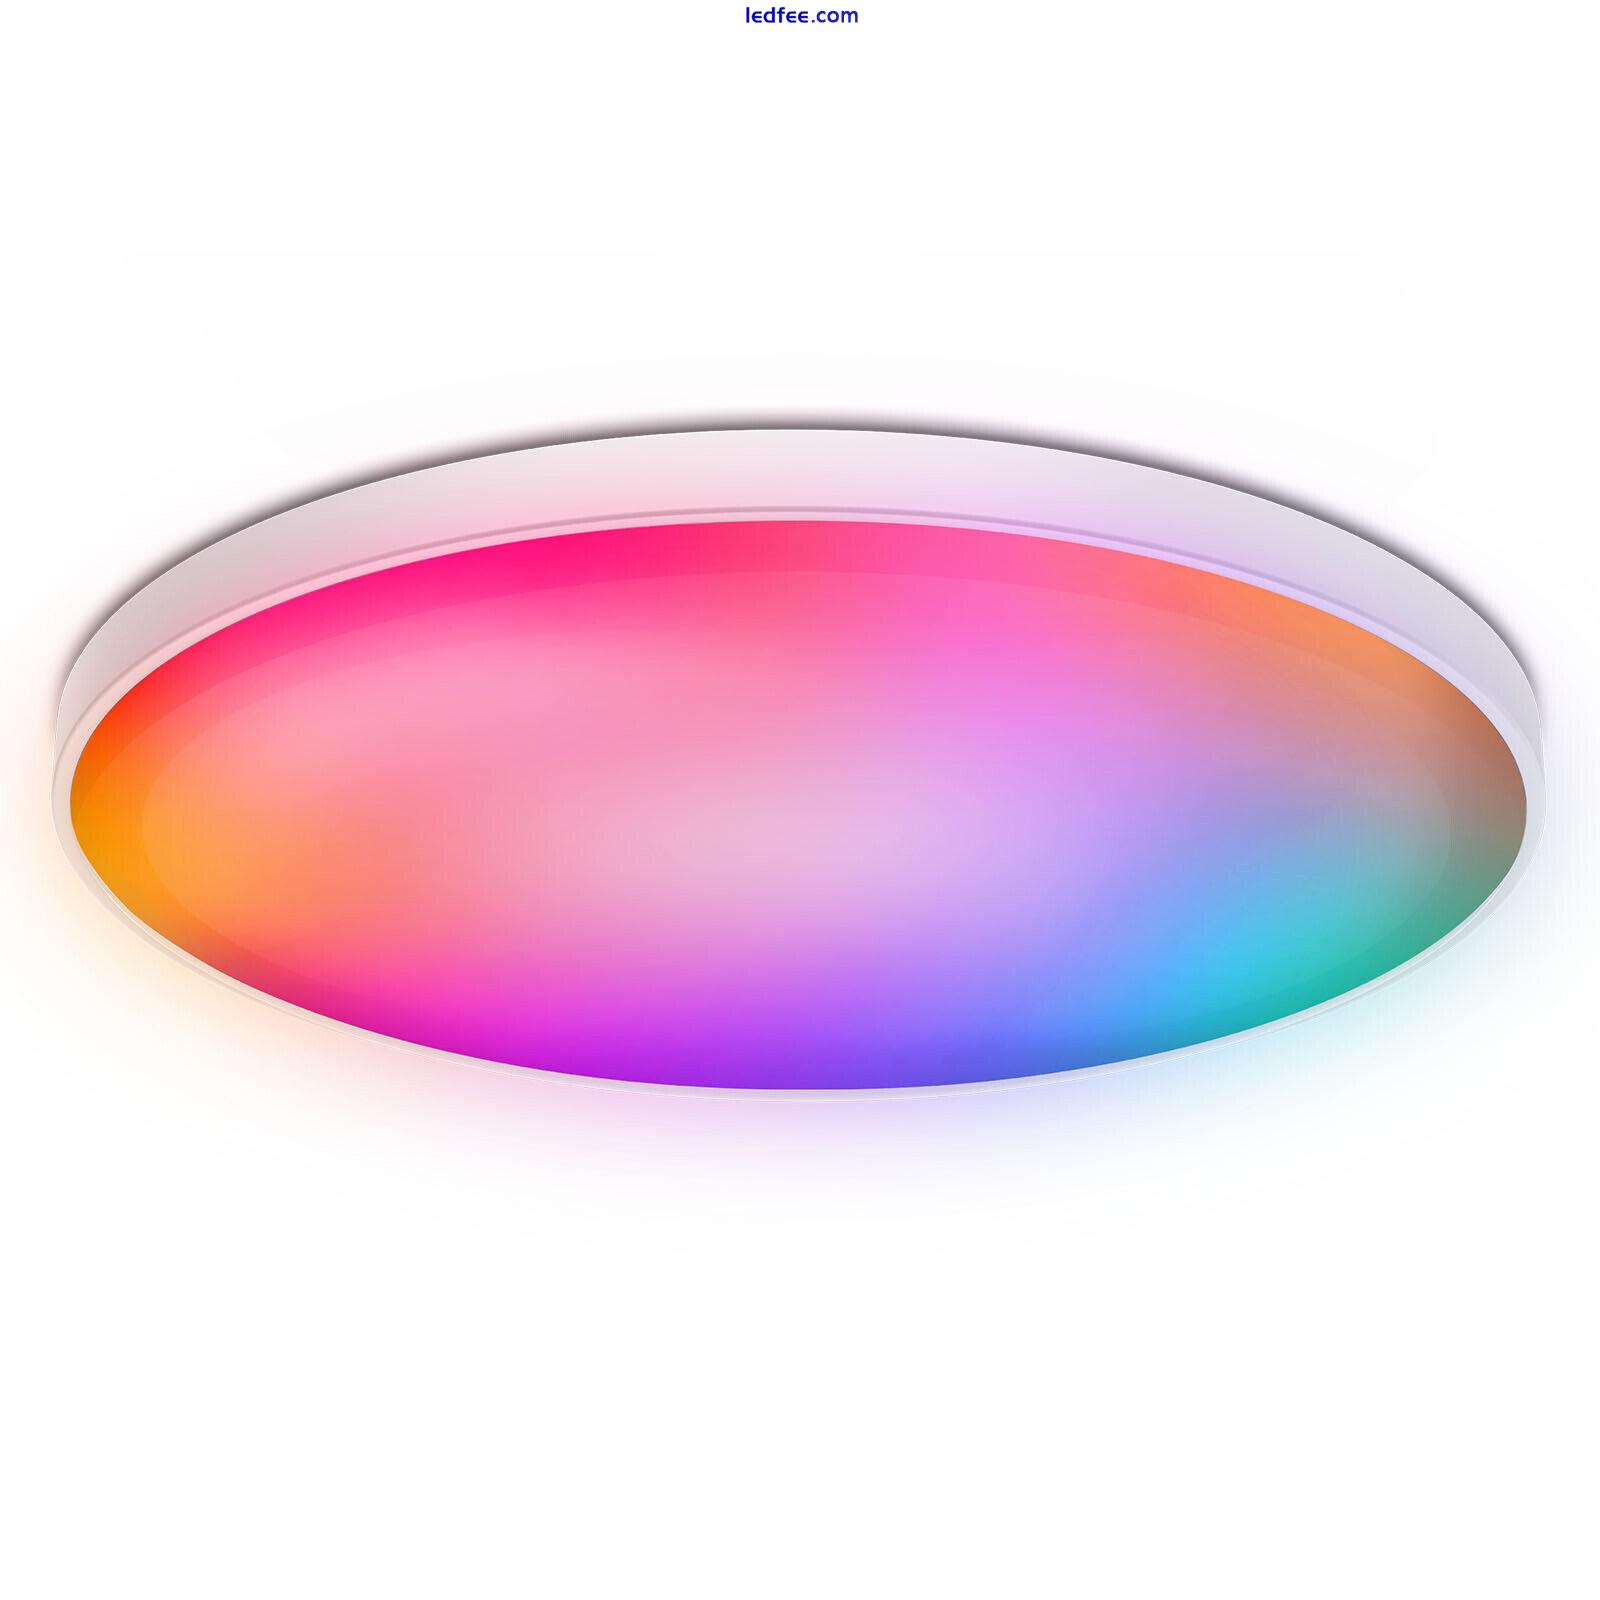 30W Smart LED Ceiling Light Lamp RGB Dimmable Bluetooth WIFI Fixture for Bedroom 2 